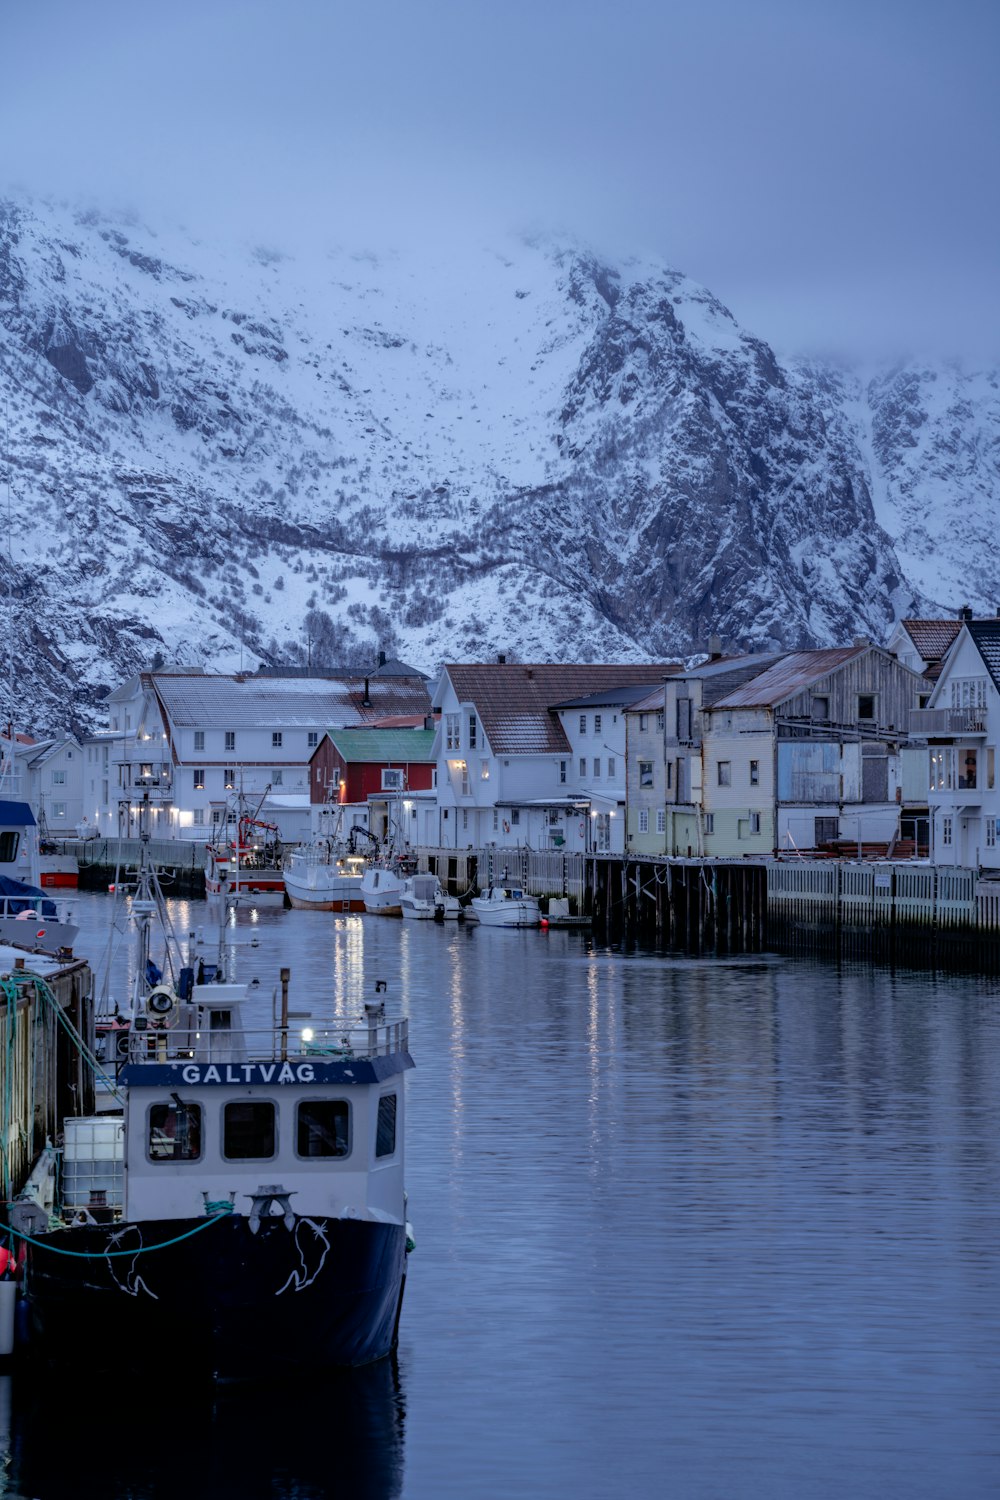 a boat is docked in a harbor with a snowy mountain in the background